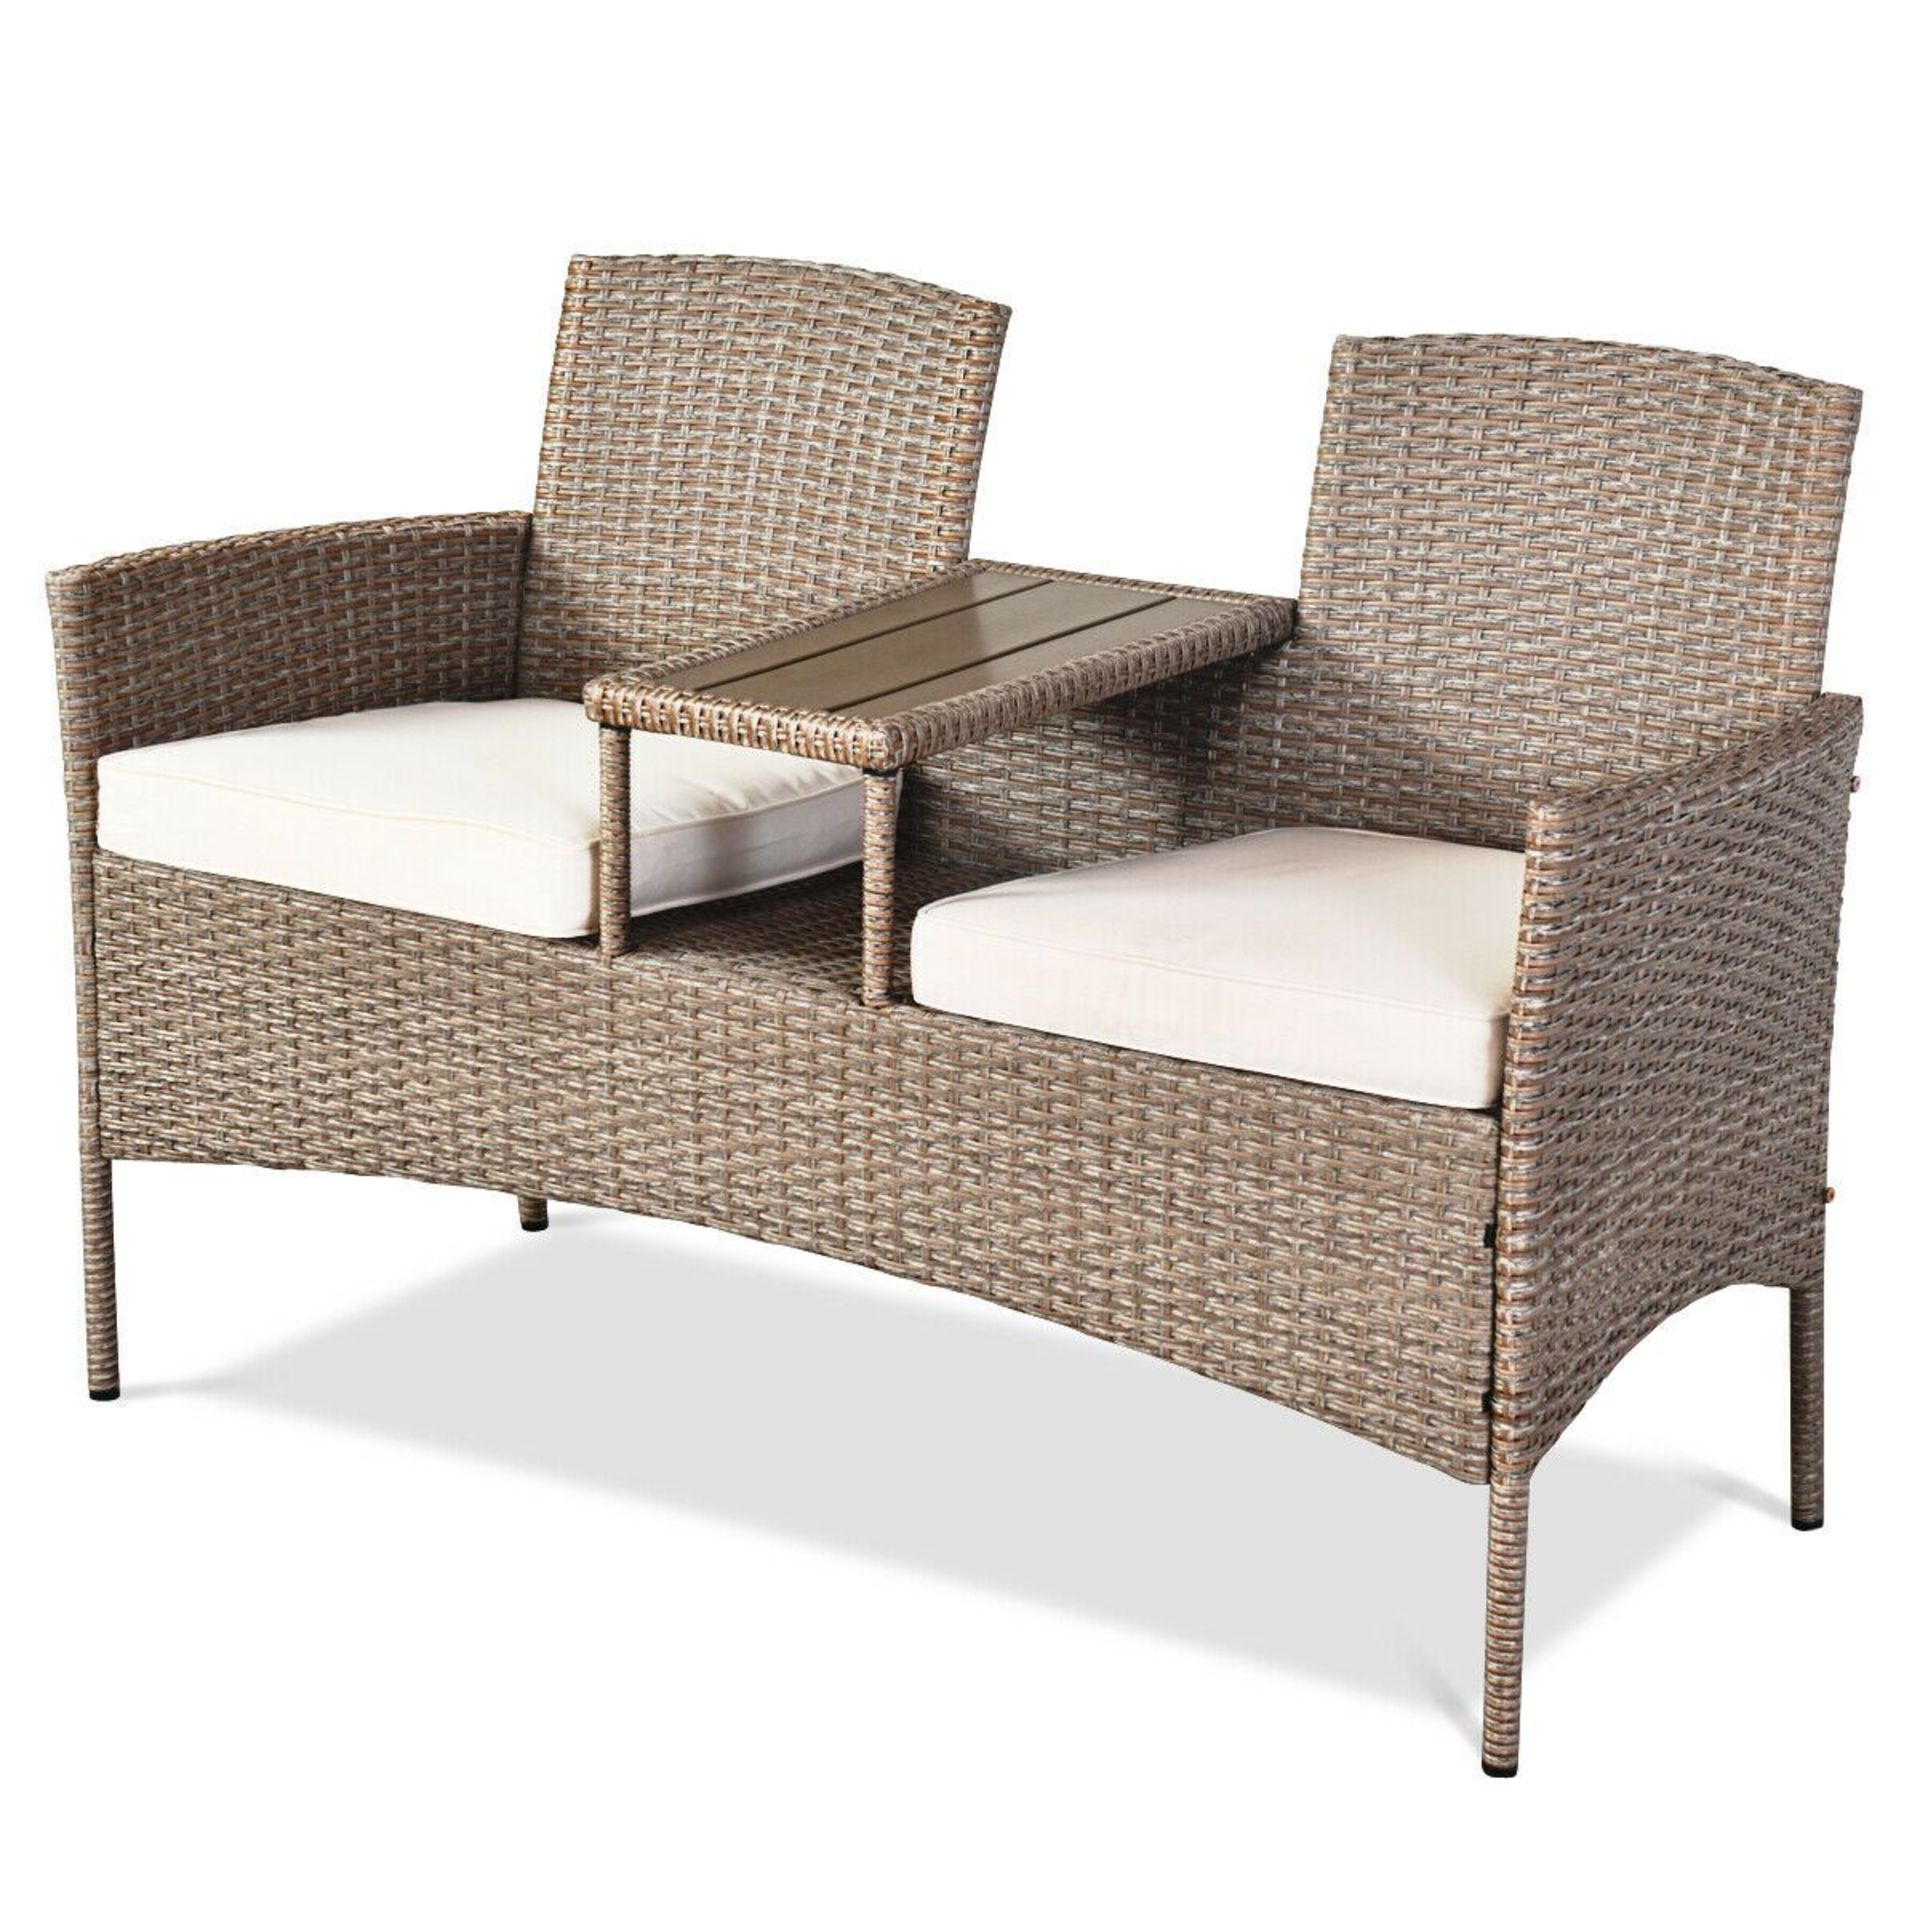 Outdoor 2 Seater Rattan Chair Middle Tea Table Padded Cushions. RRP £199.99. If you are looking